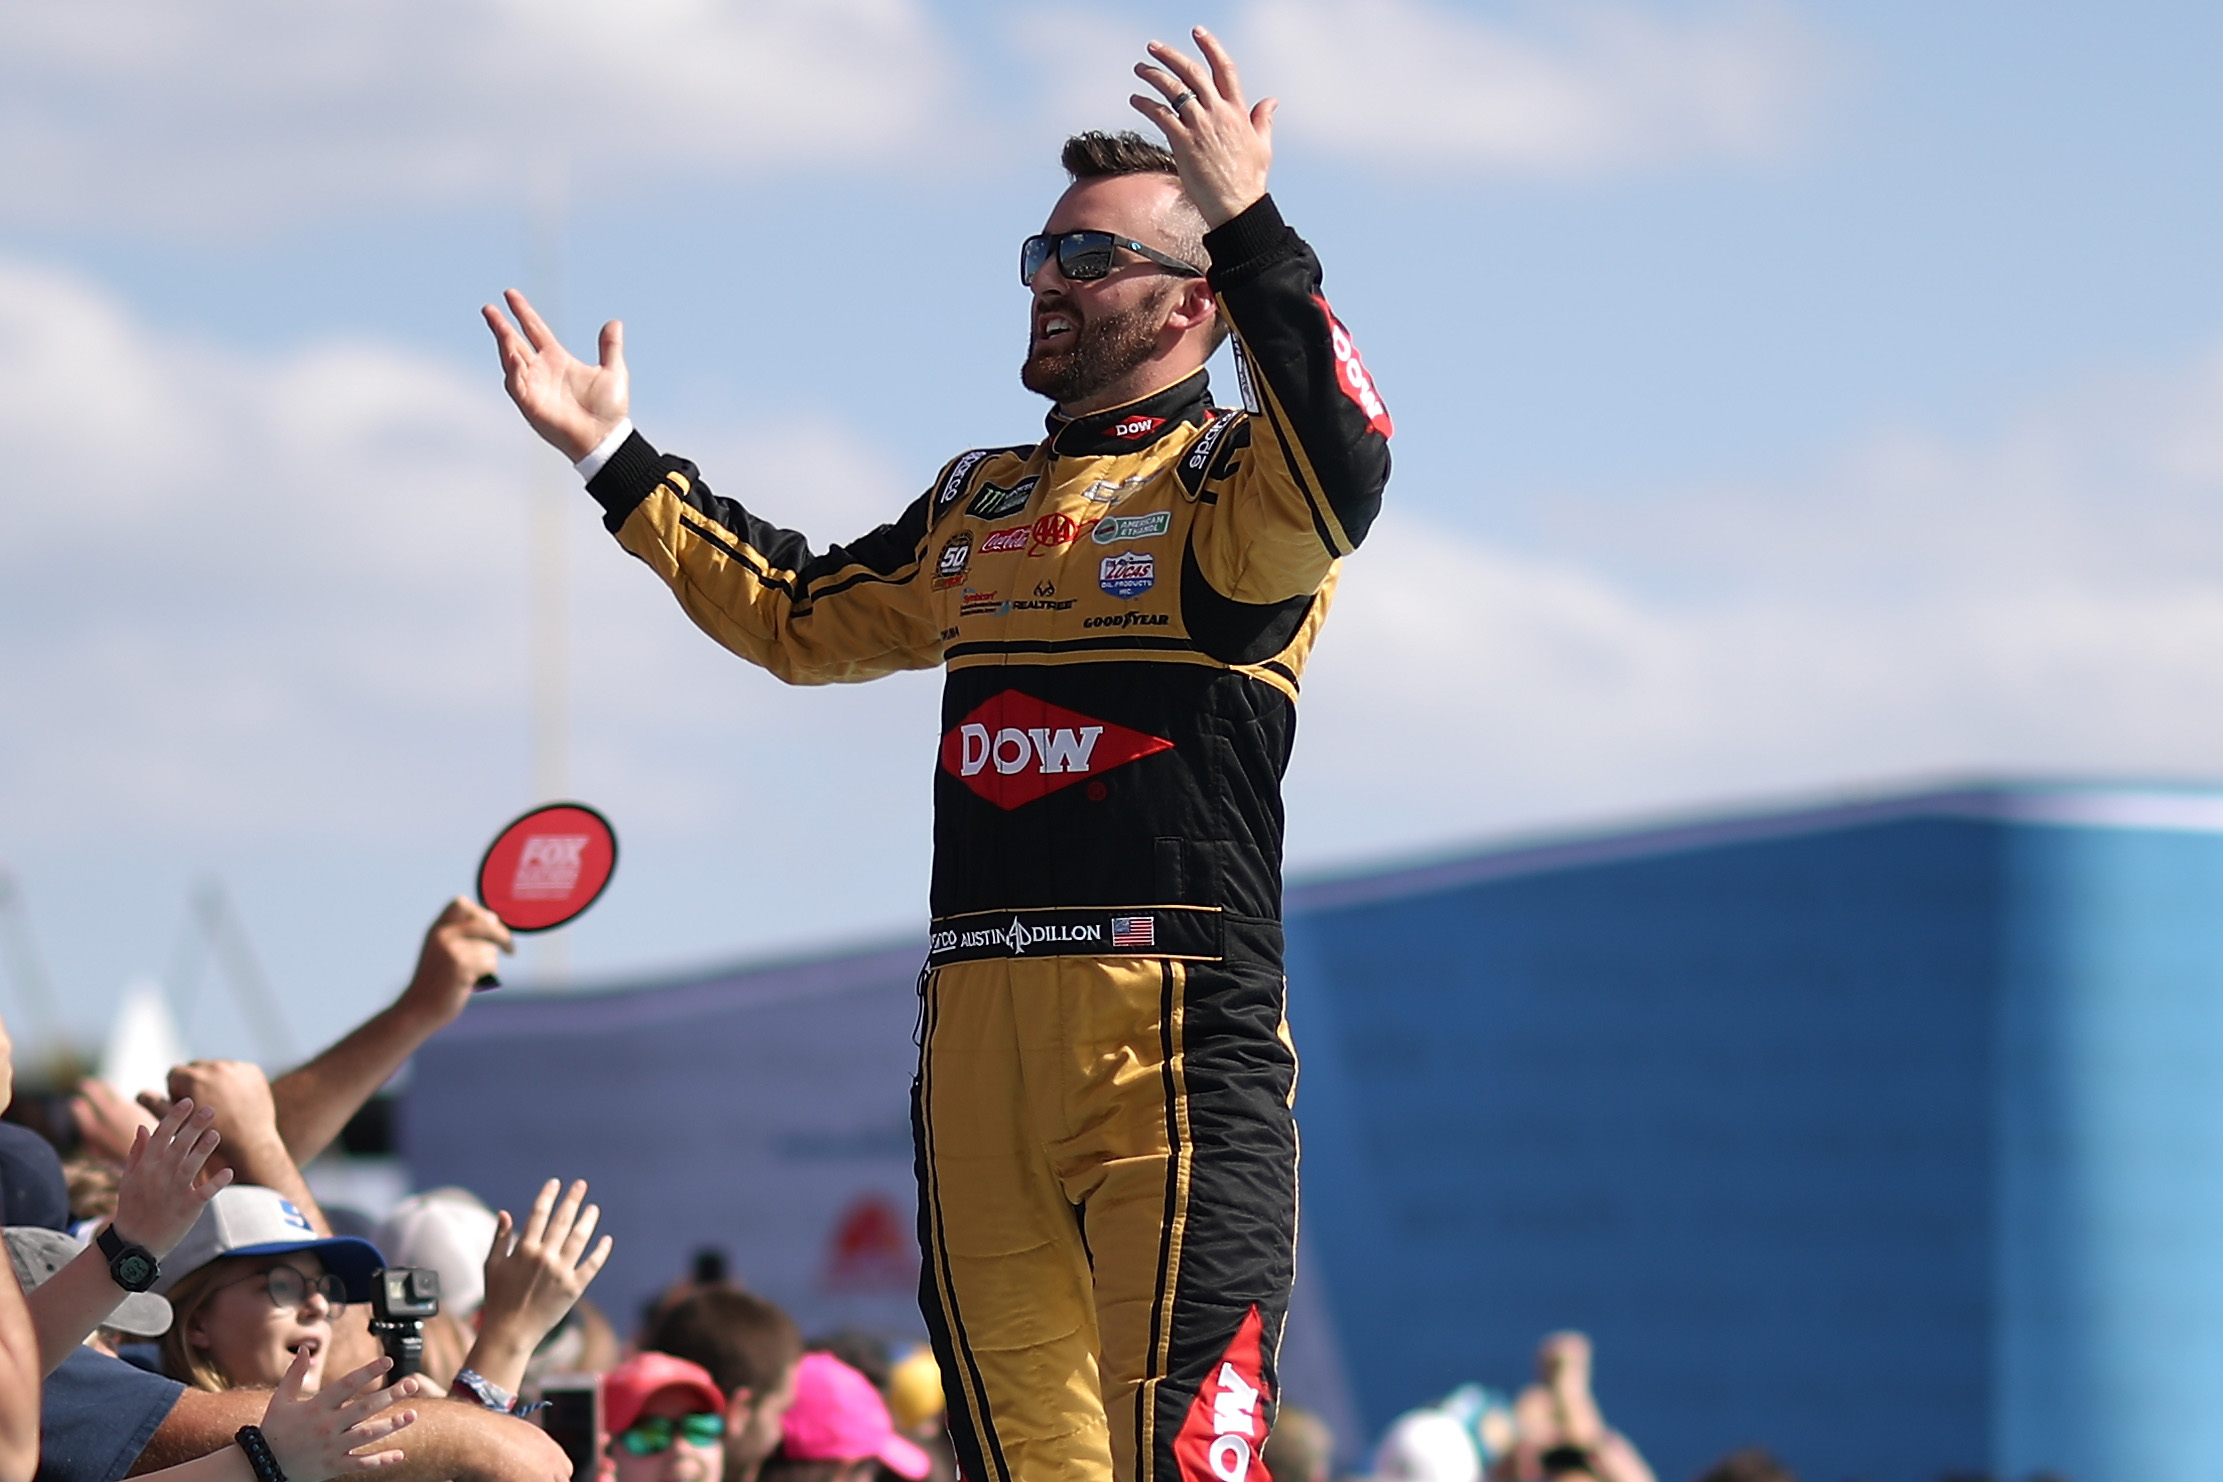 Austin Dillon is looking for another Daytona 500 win.